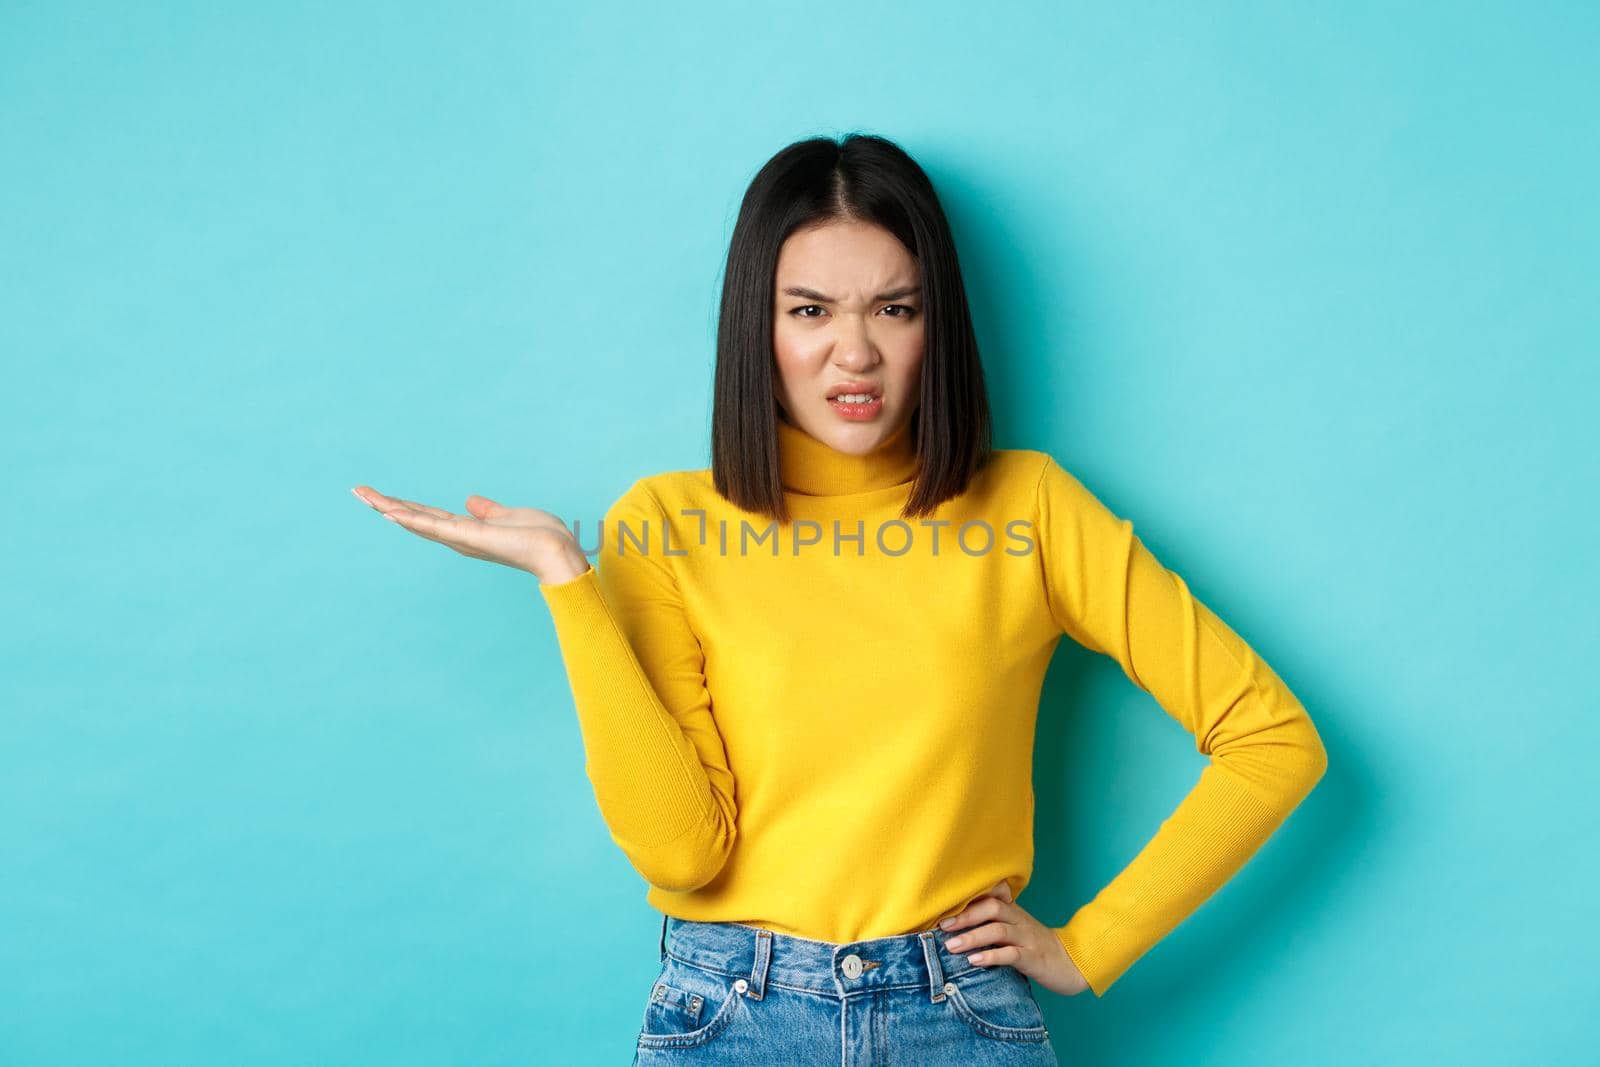 Frustrated and pissed-off asian girl raising hand up and grimacing bothered, staring at something with annoyance and disappointment, standing over blue background.